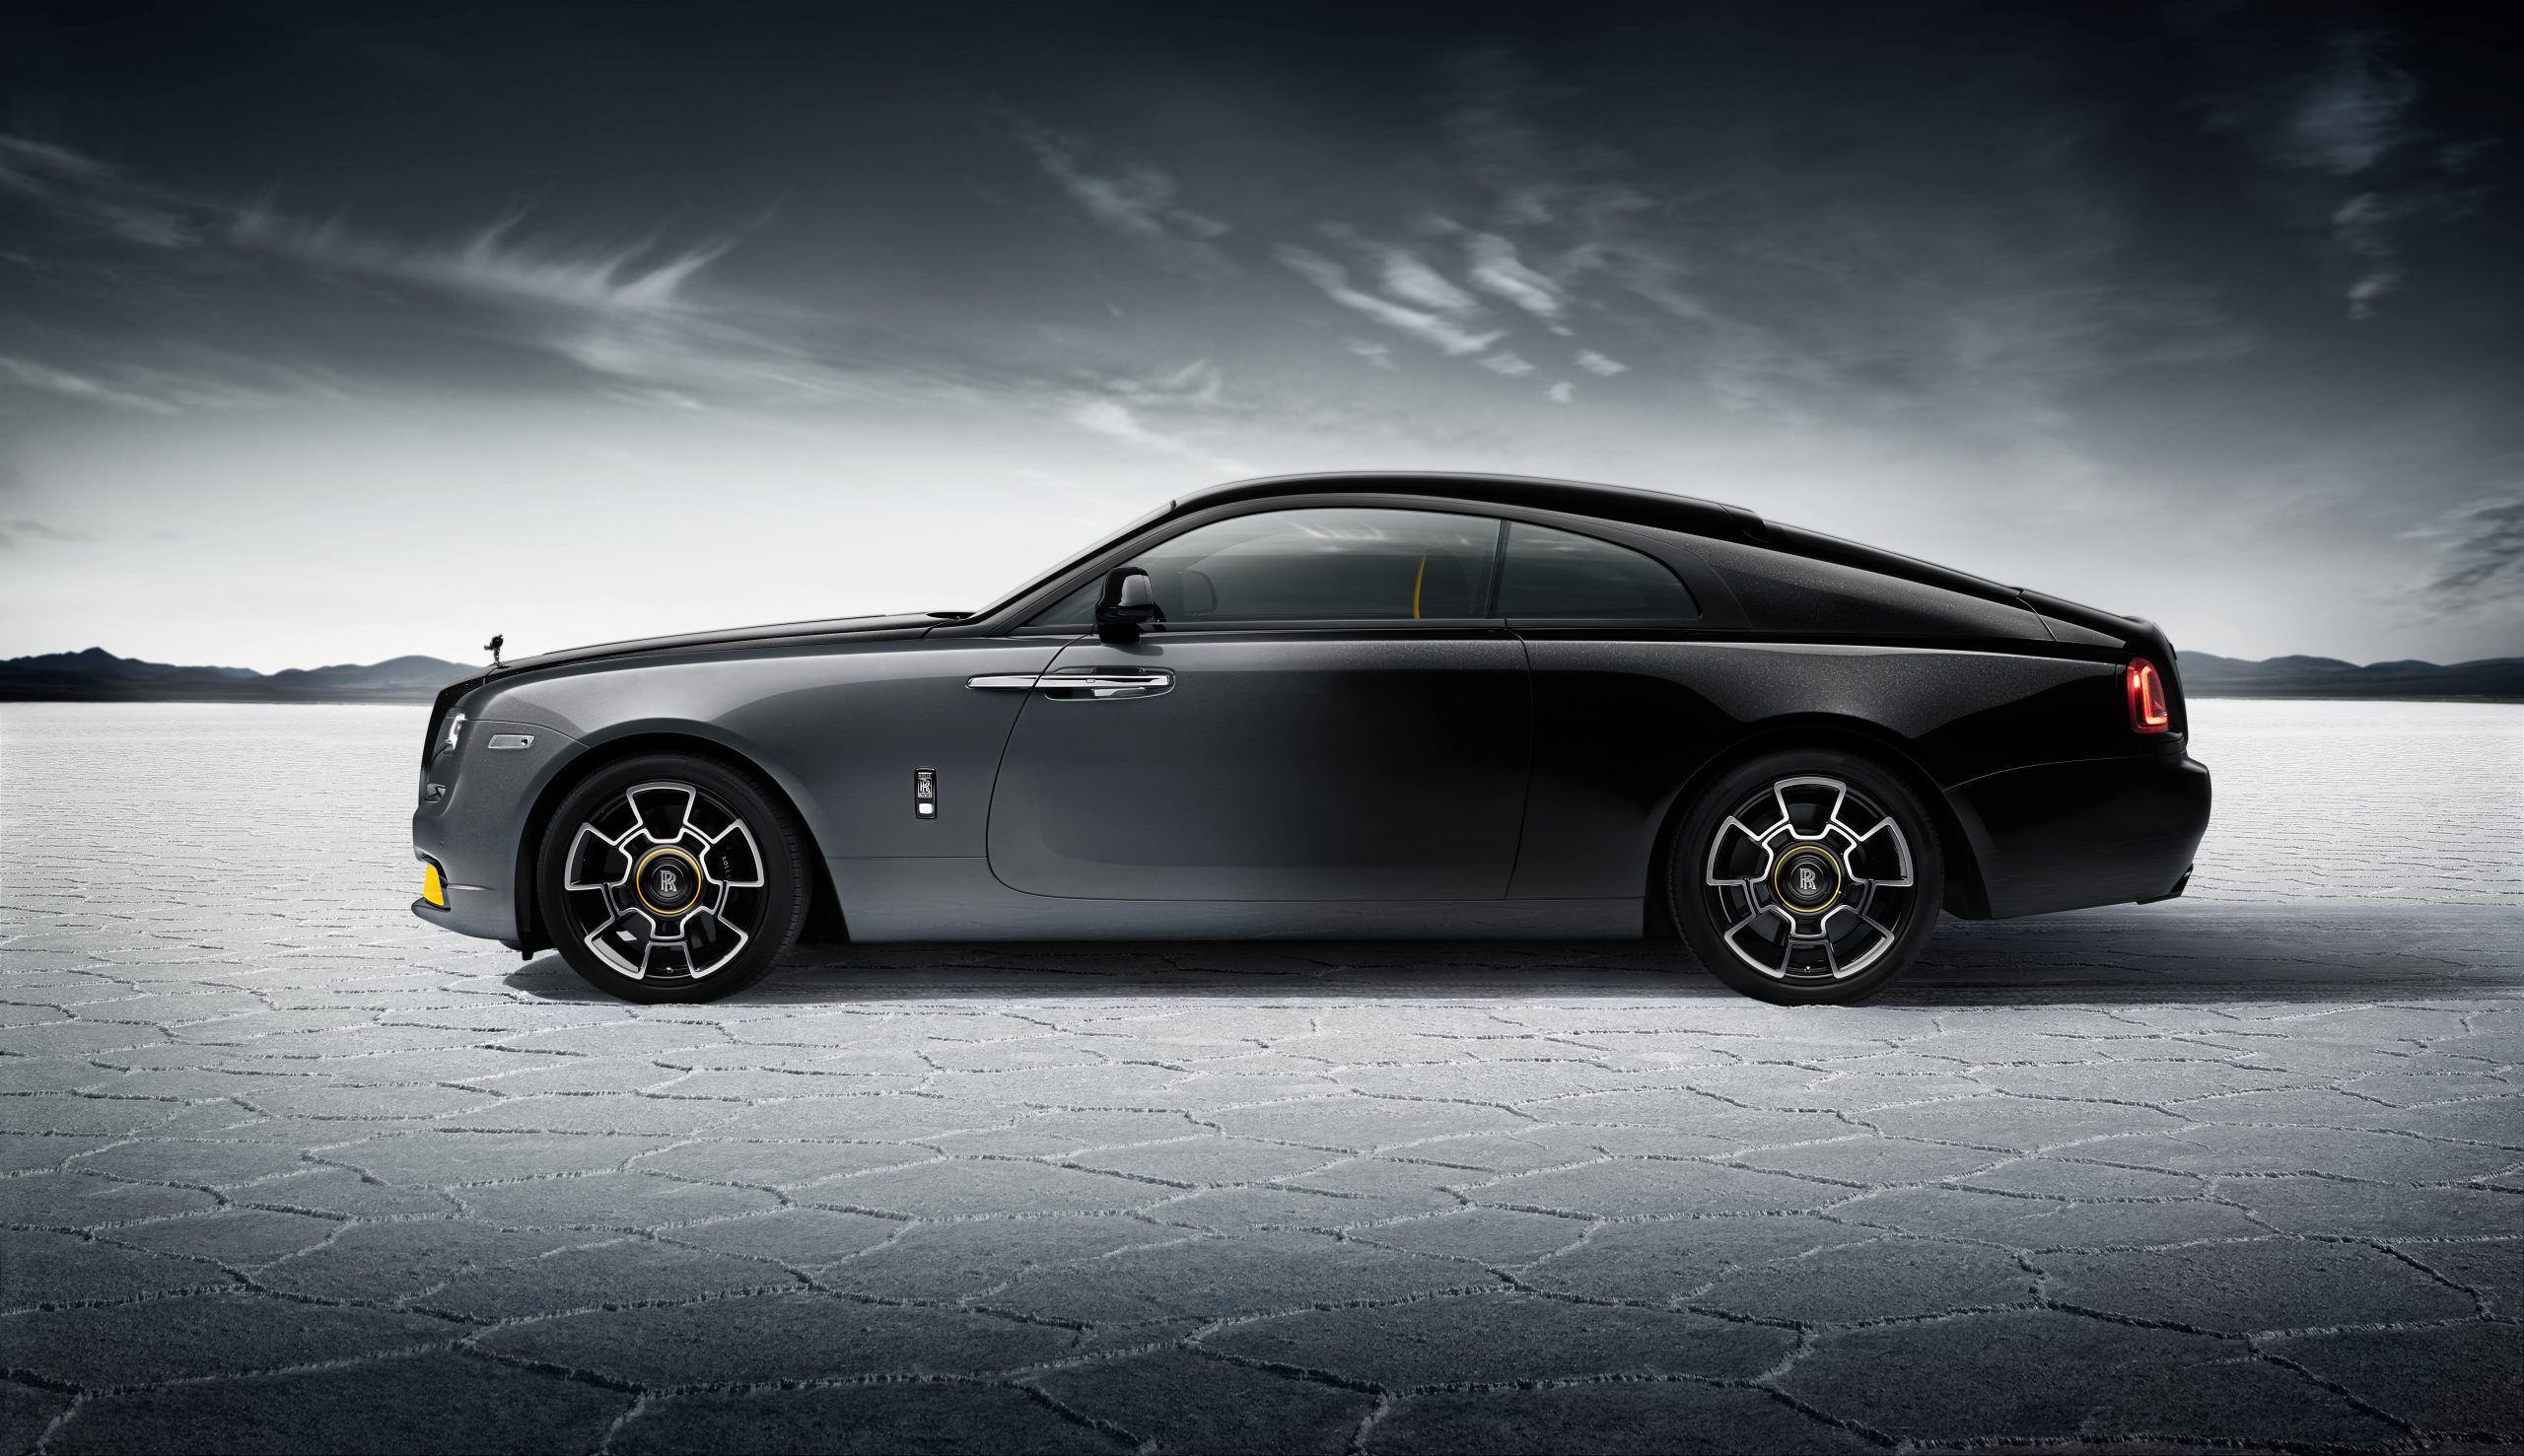 Used RollsRoyce Wraith Cars For Sale  AutoTrader UK